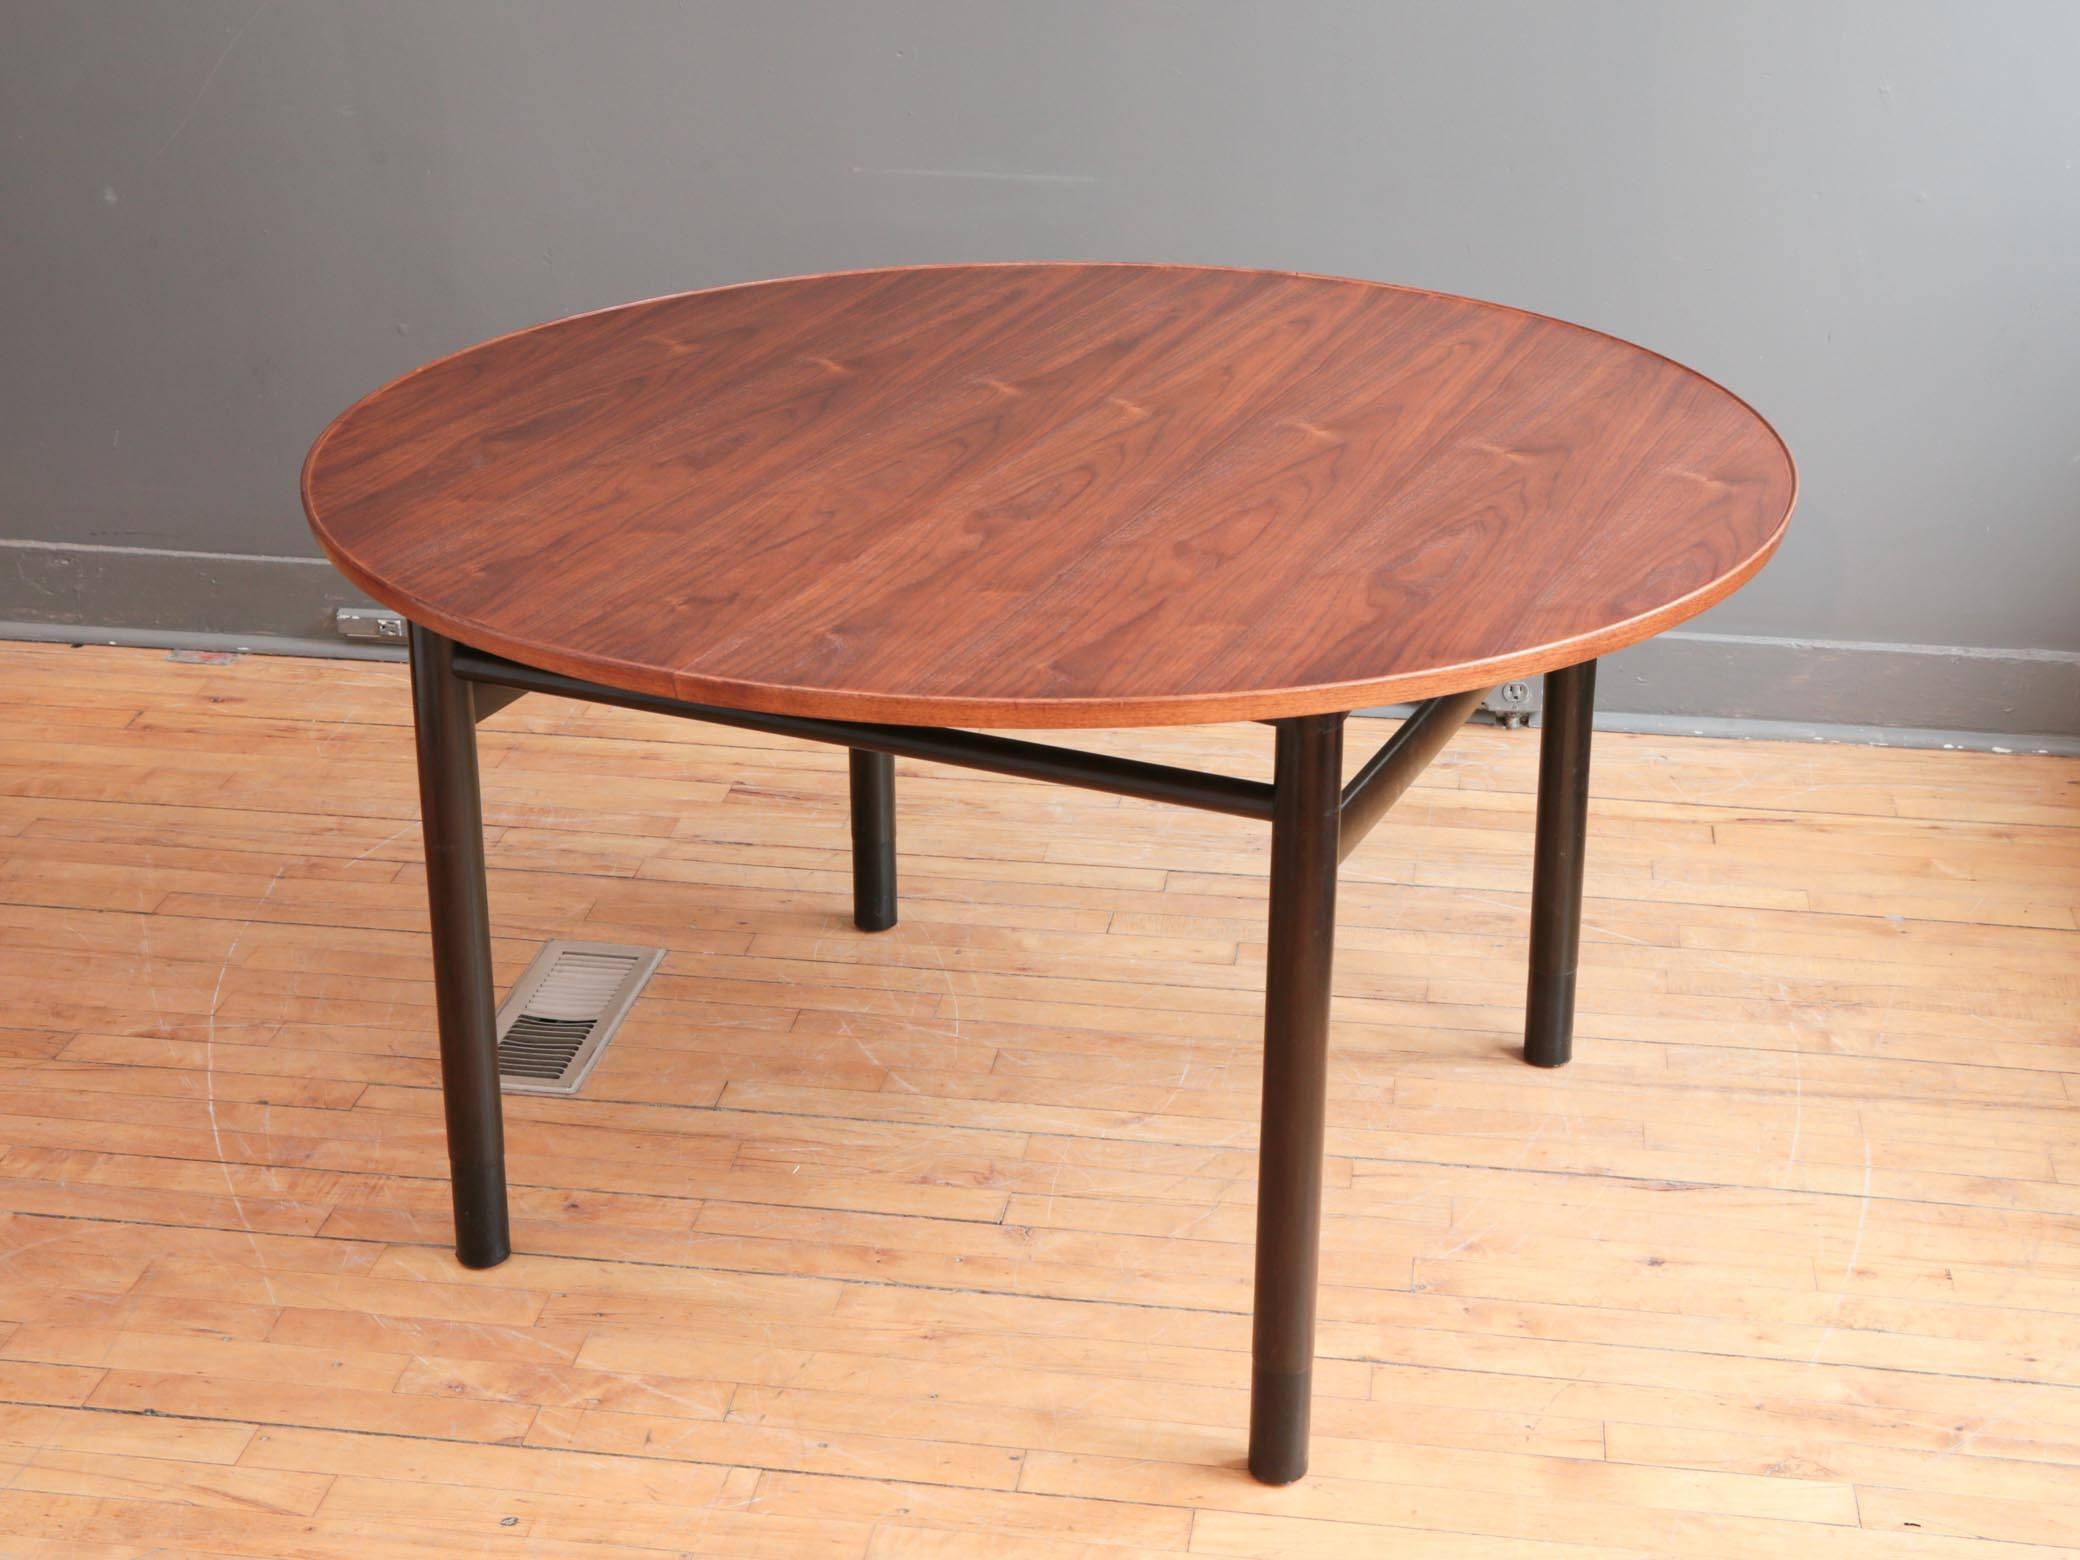 A very handsome dining table designed by Edward Wormley for Dunbar, circa 1950s. Featuring a round walnut top with raised lip supported by a black lacquered mahogany base. Each leg finished with a subtle leather cuff. One removable leaf allows table